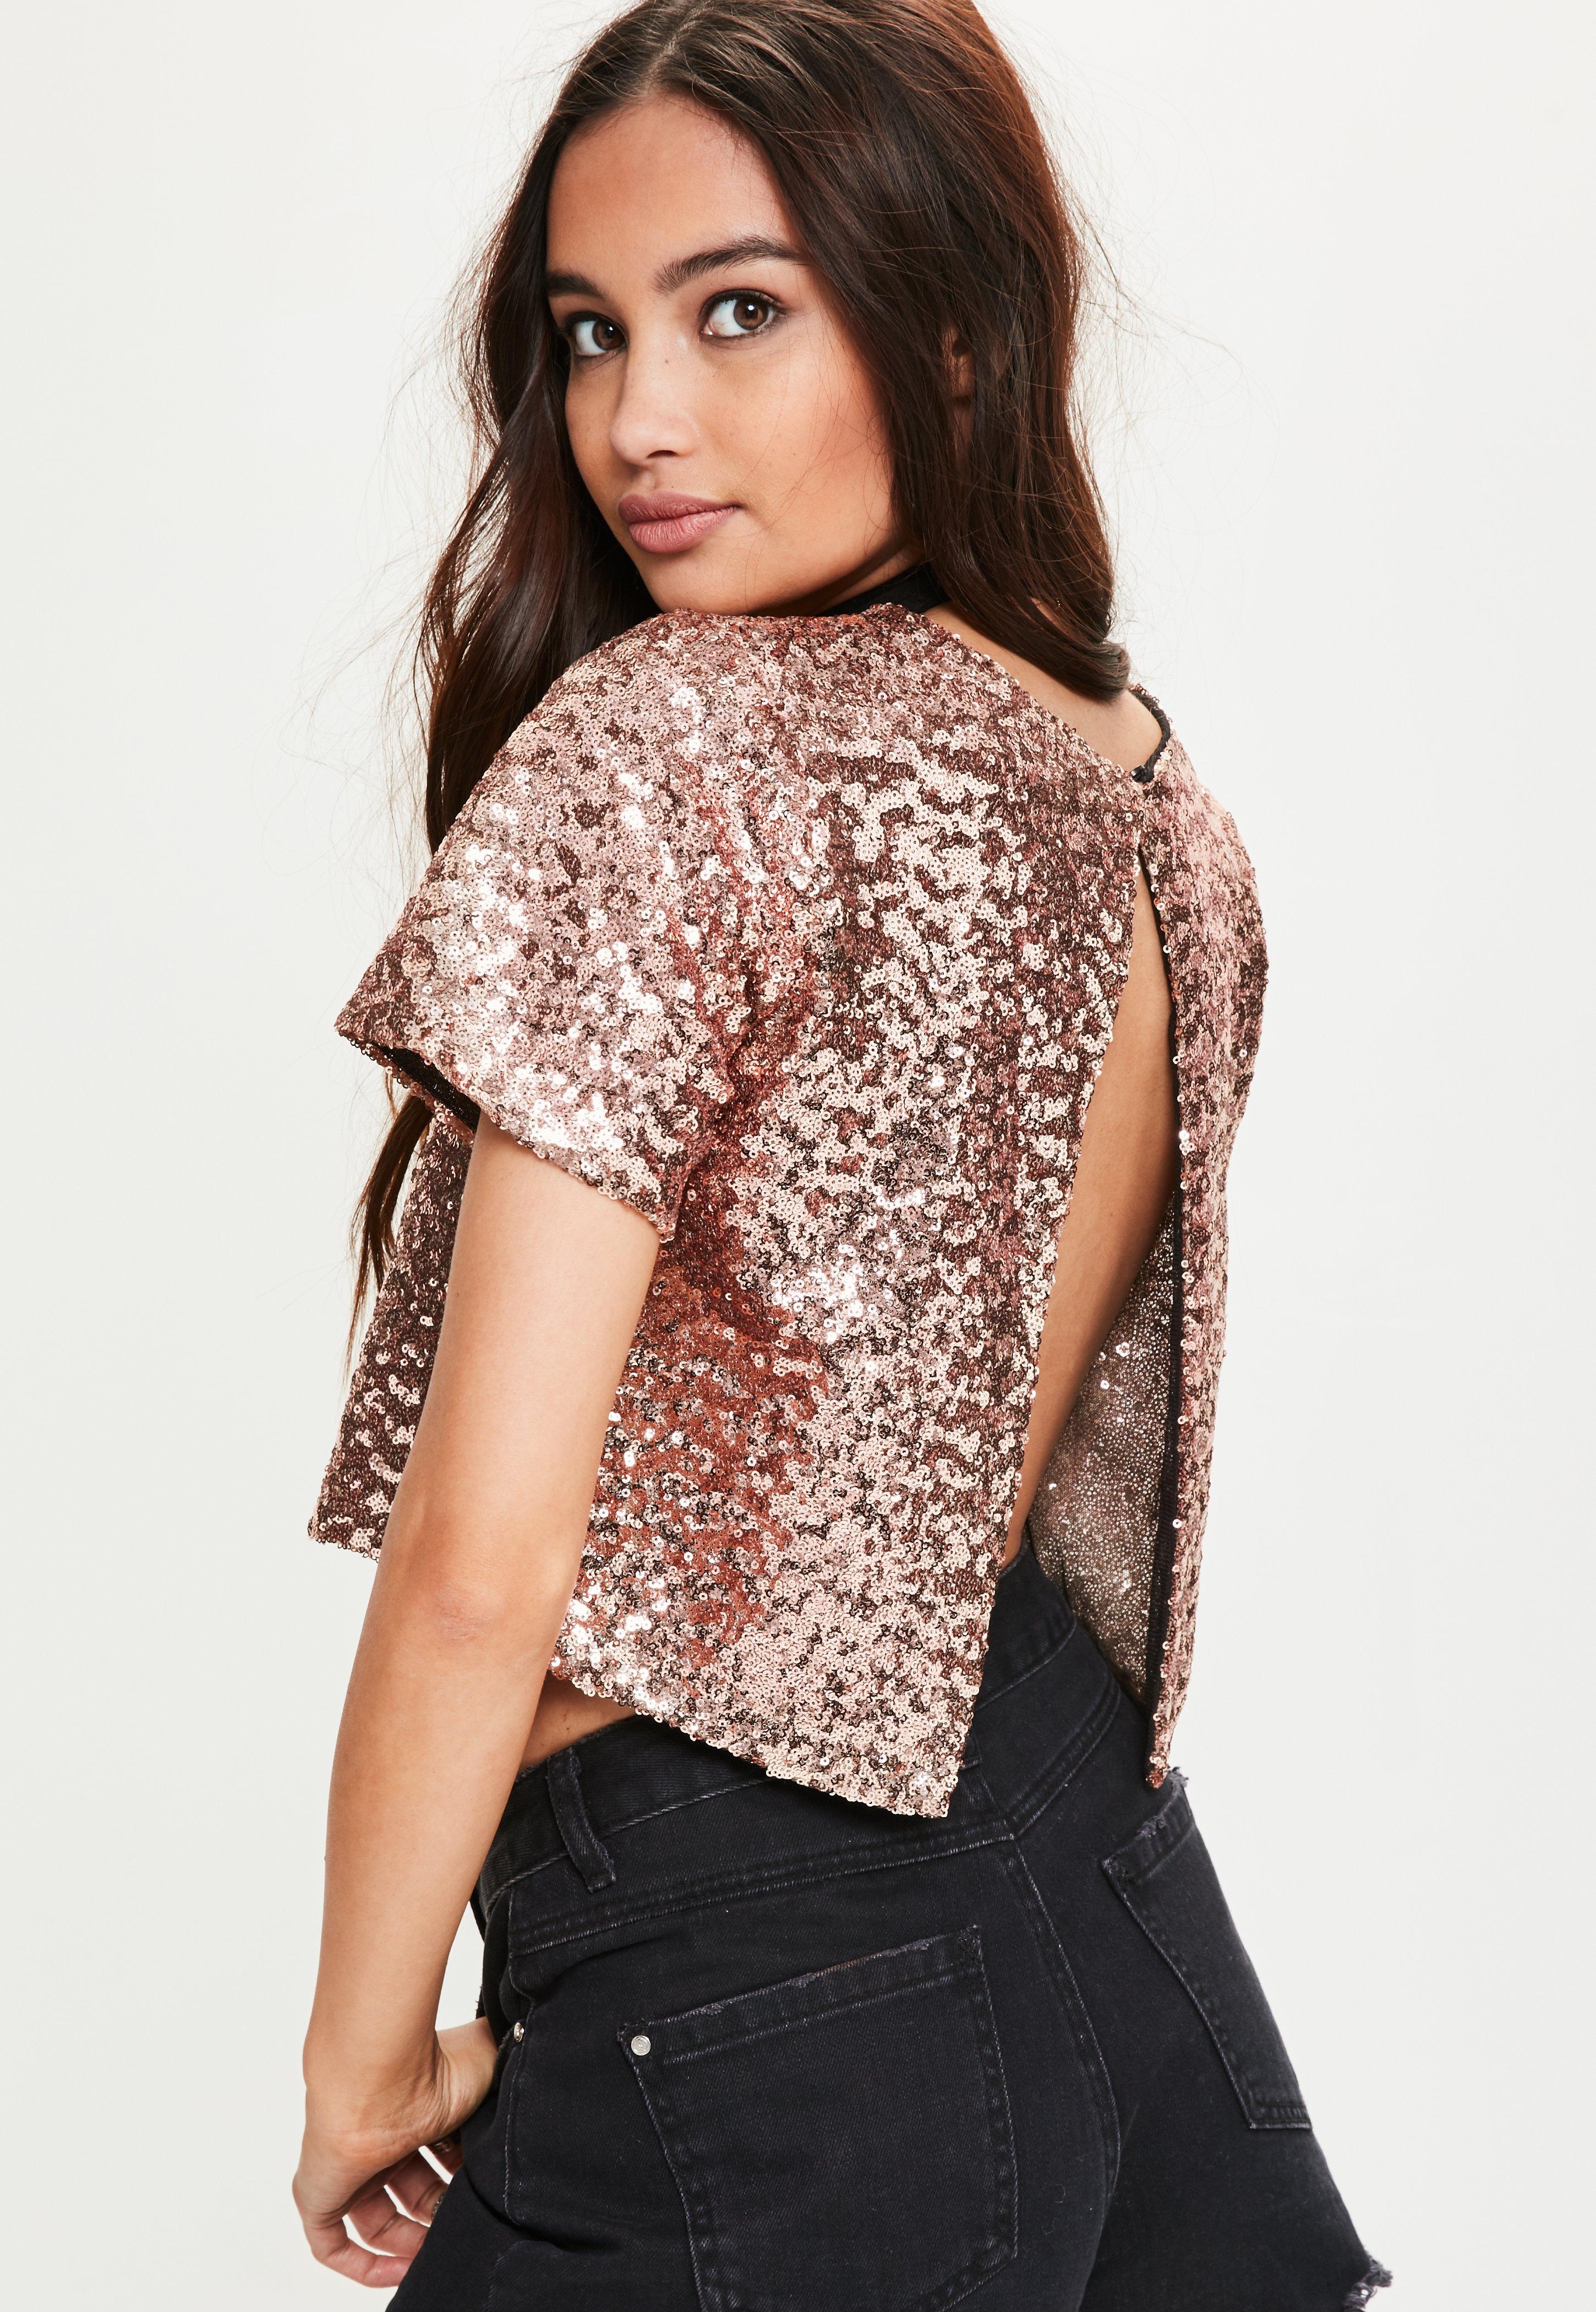 Lyst - Missguided Rose Gold Open Back Sequin Top in Pink